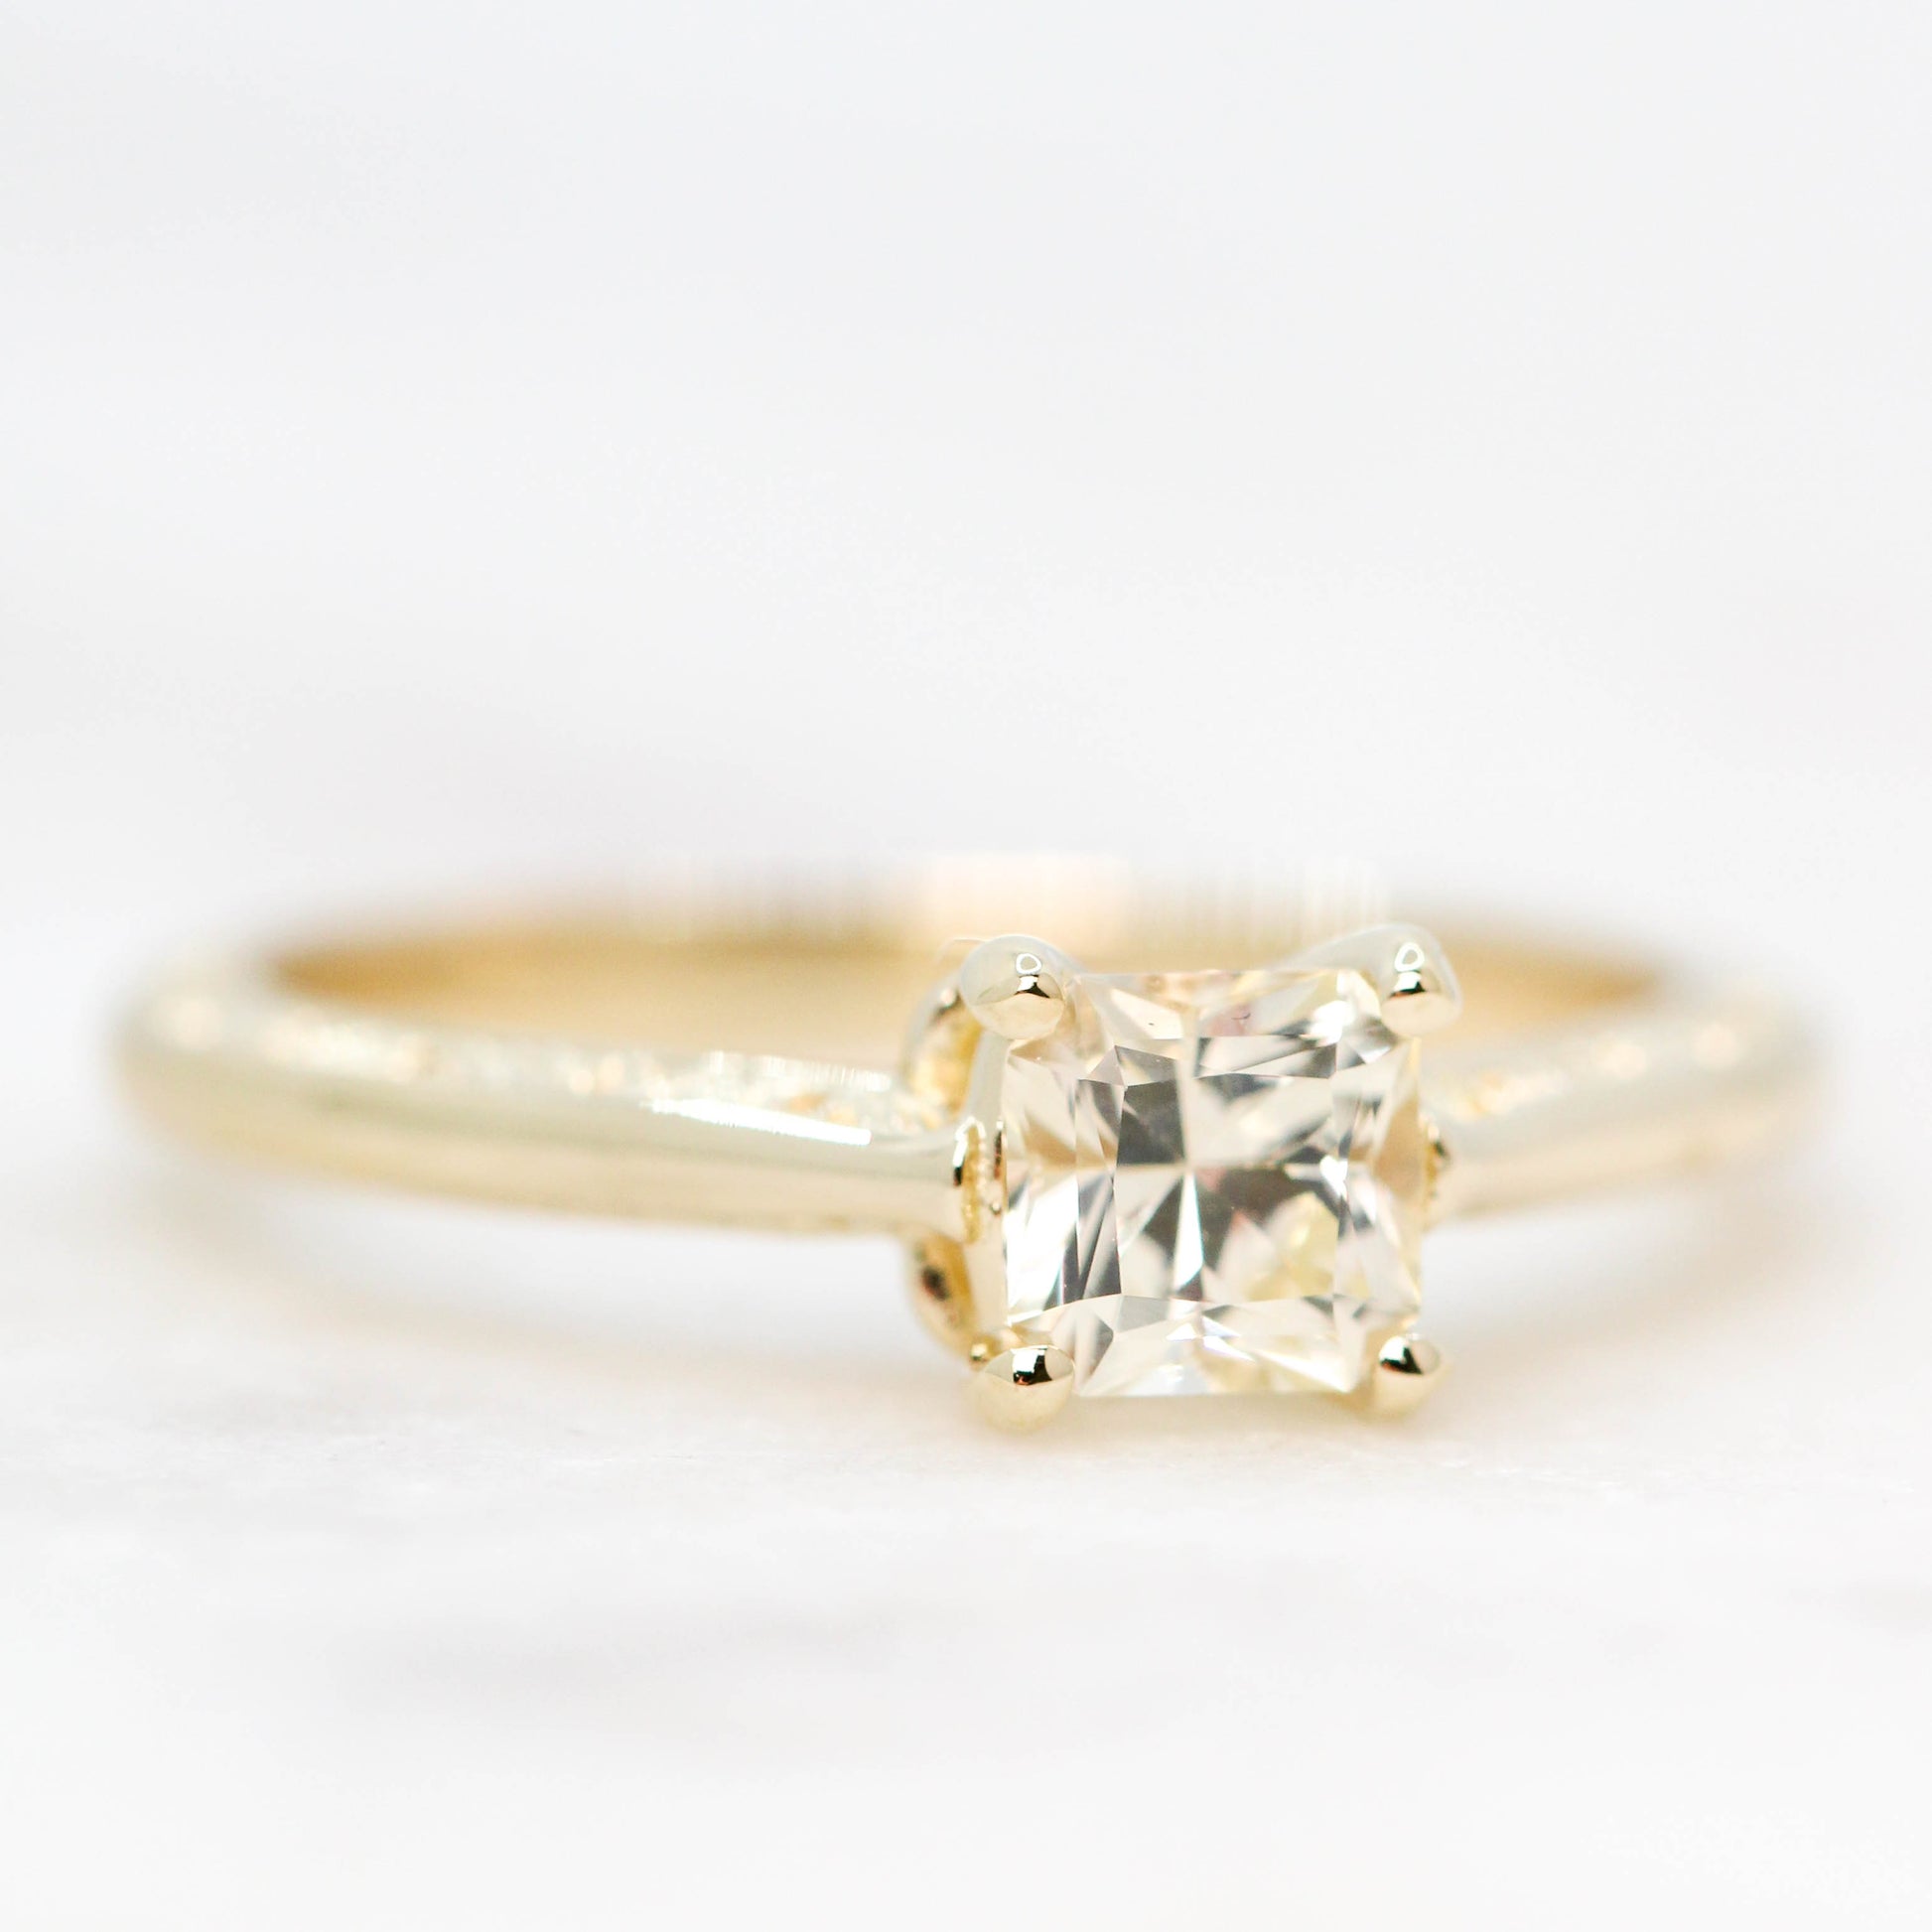 Vivienne Ring with a 0.77 Carat Radiant Cut Champagne Sapphire in 14k Yellow Gold - Ready to Size and Ship - Midwinter Co. Alternative Bridal Rings and Modern Fine Jewelry